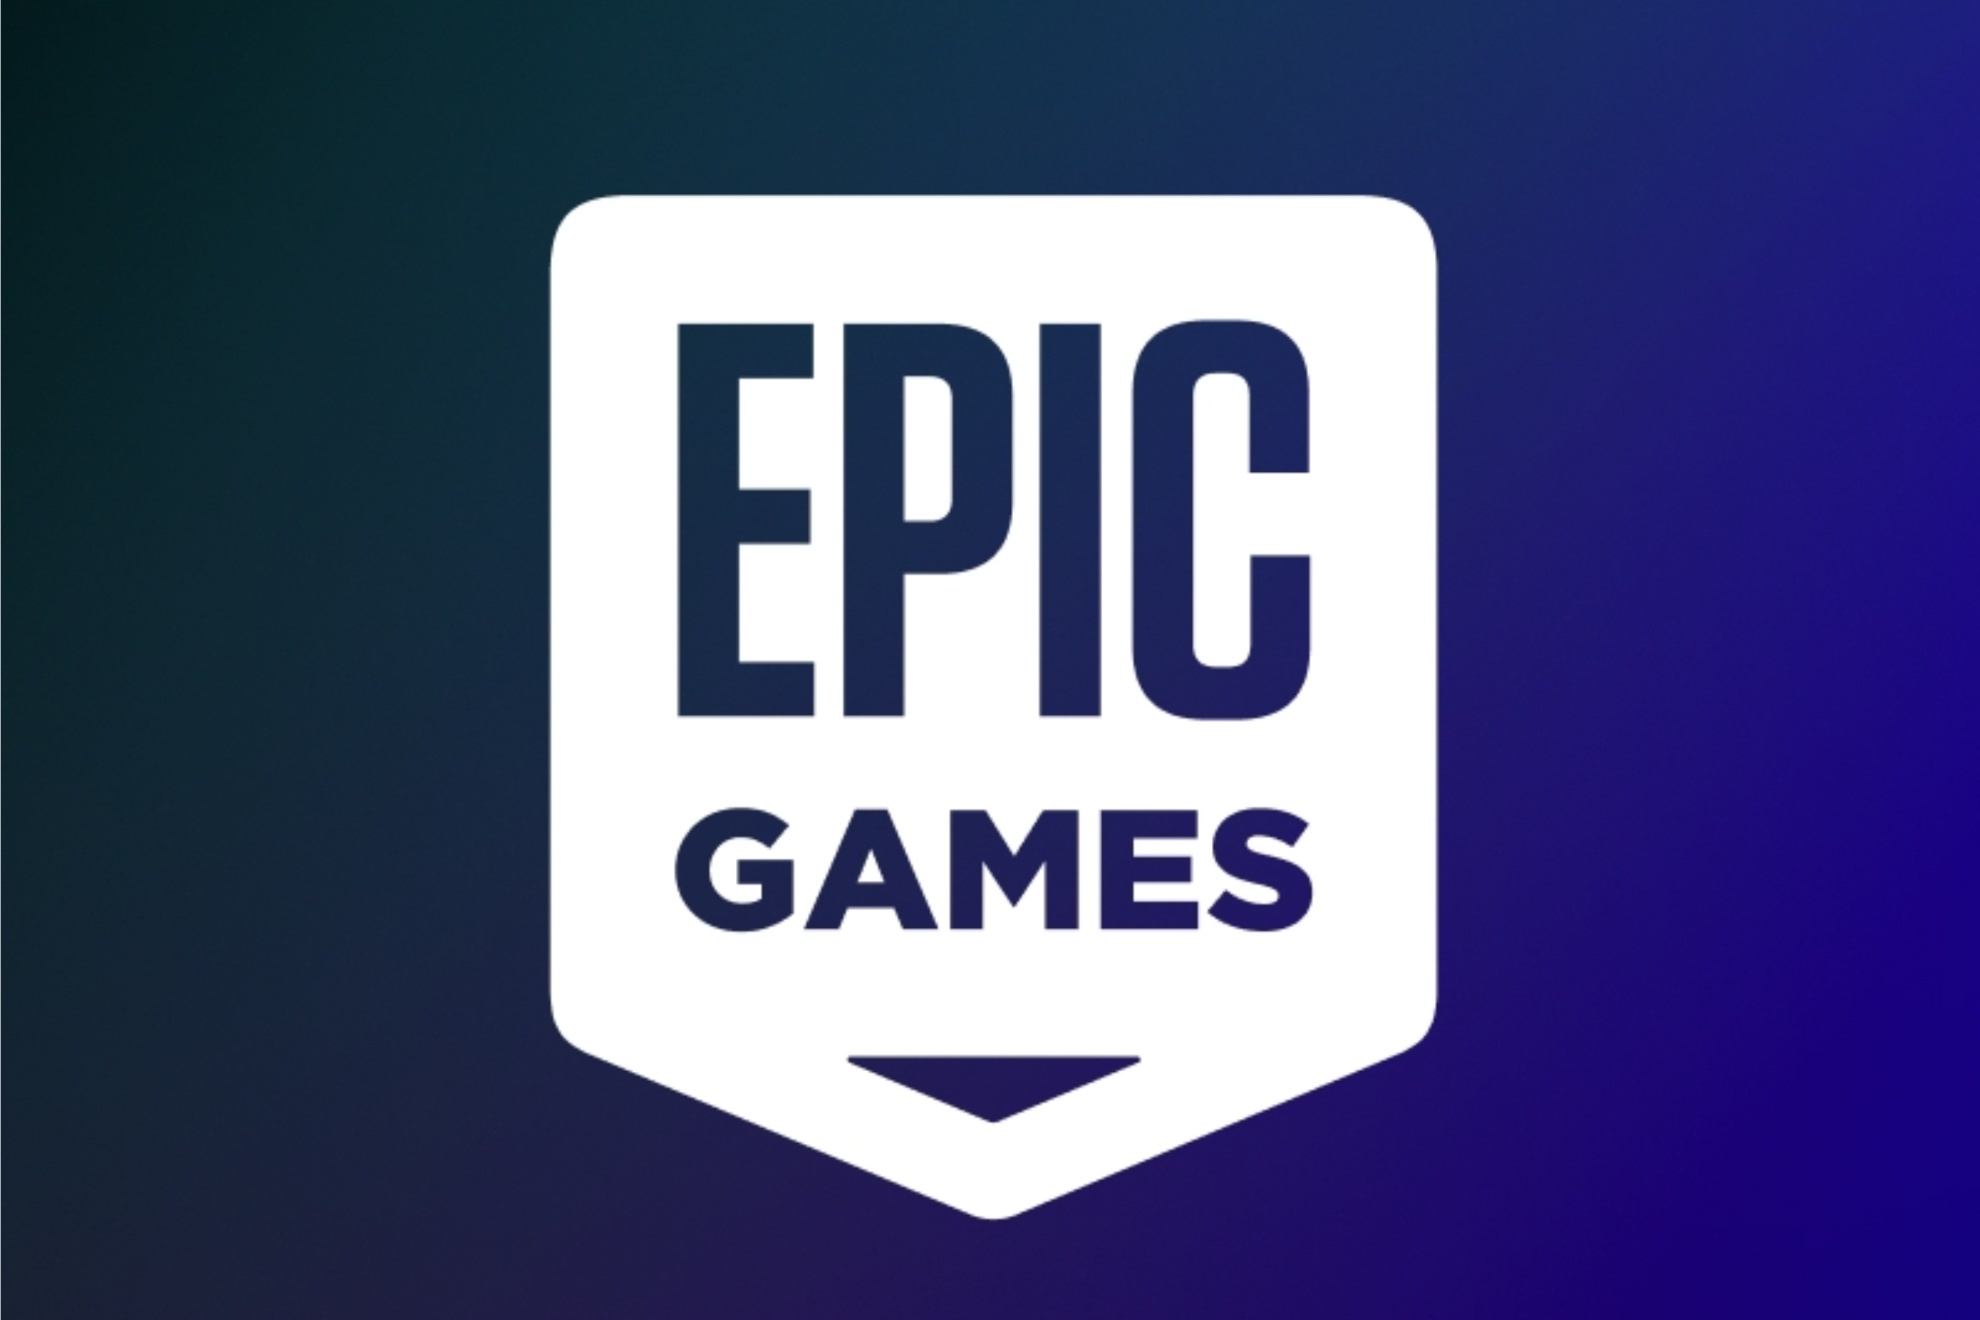 Epic Games' net worth has increased 3,000-fold in 10 years.